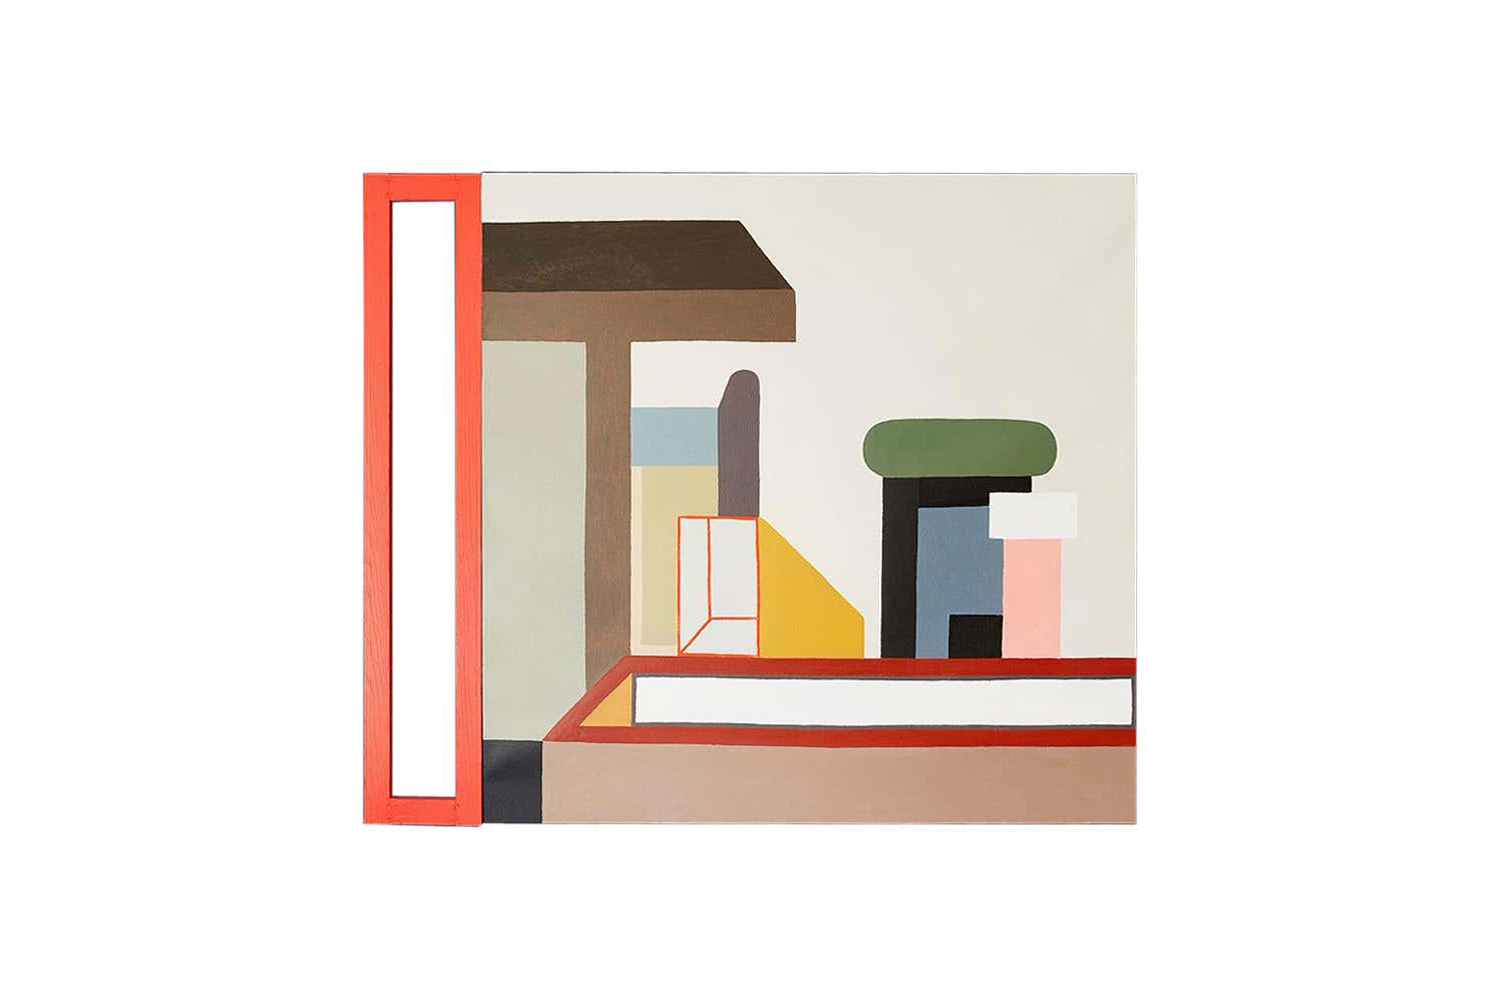 the natalie du pasquier oil on canvas piece on the wall was painted in 2017 b 22